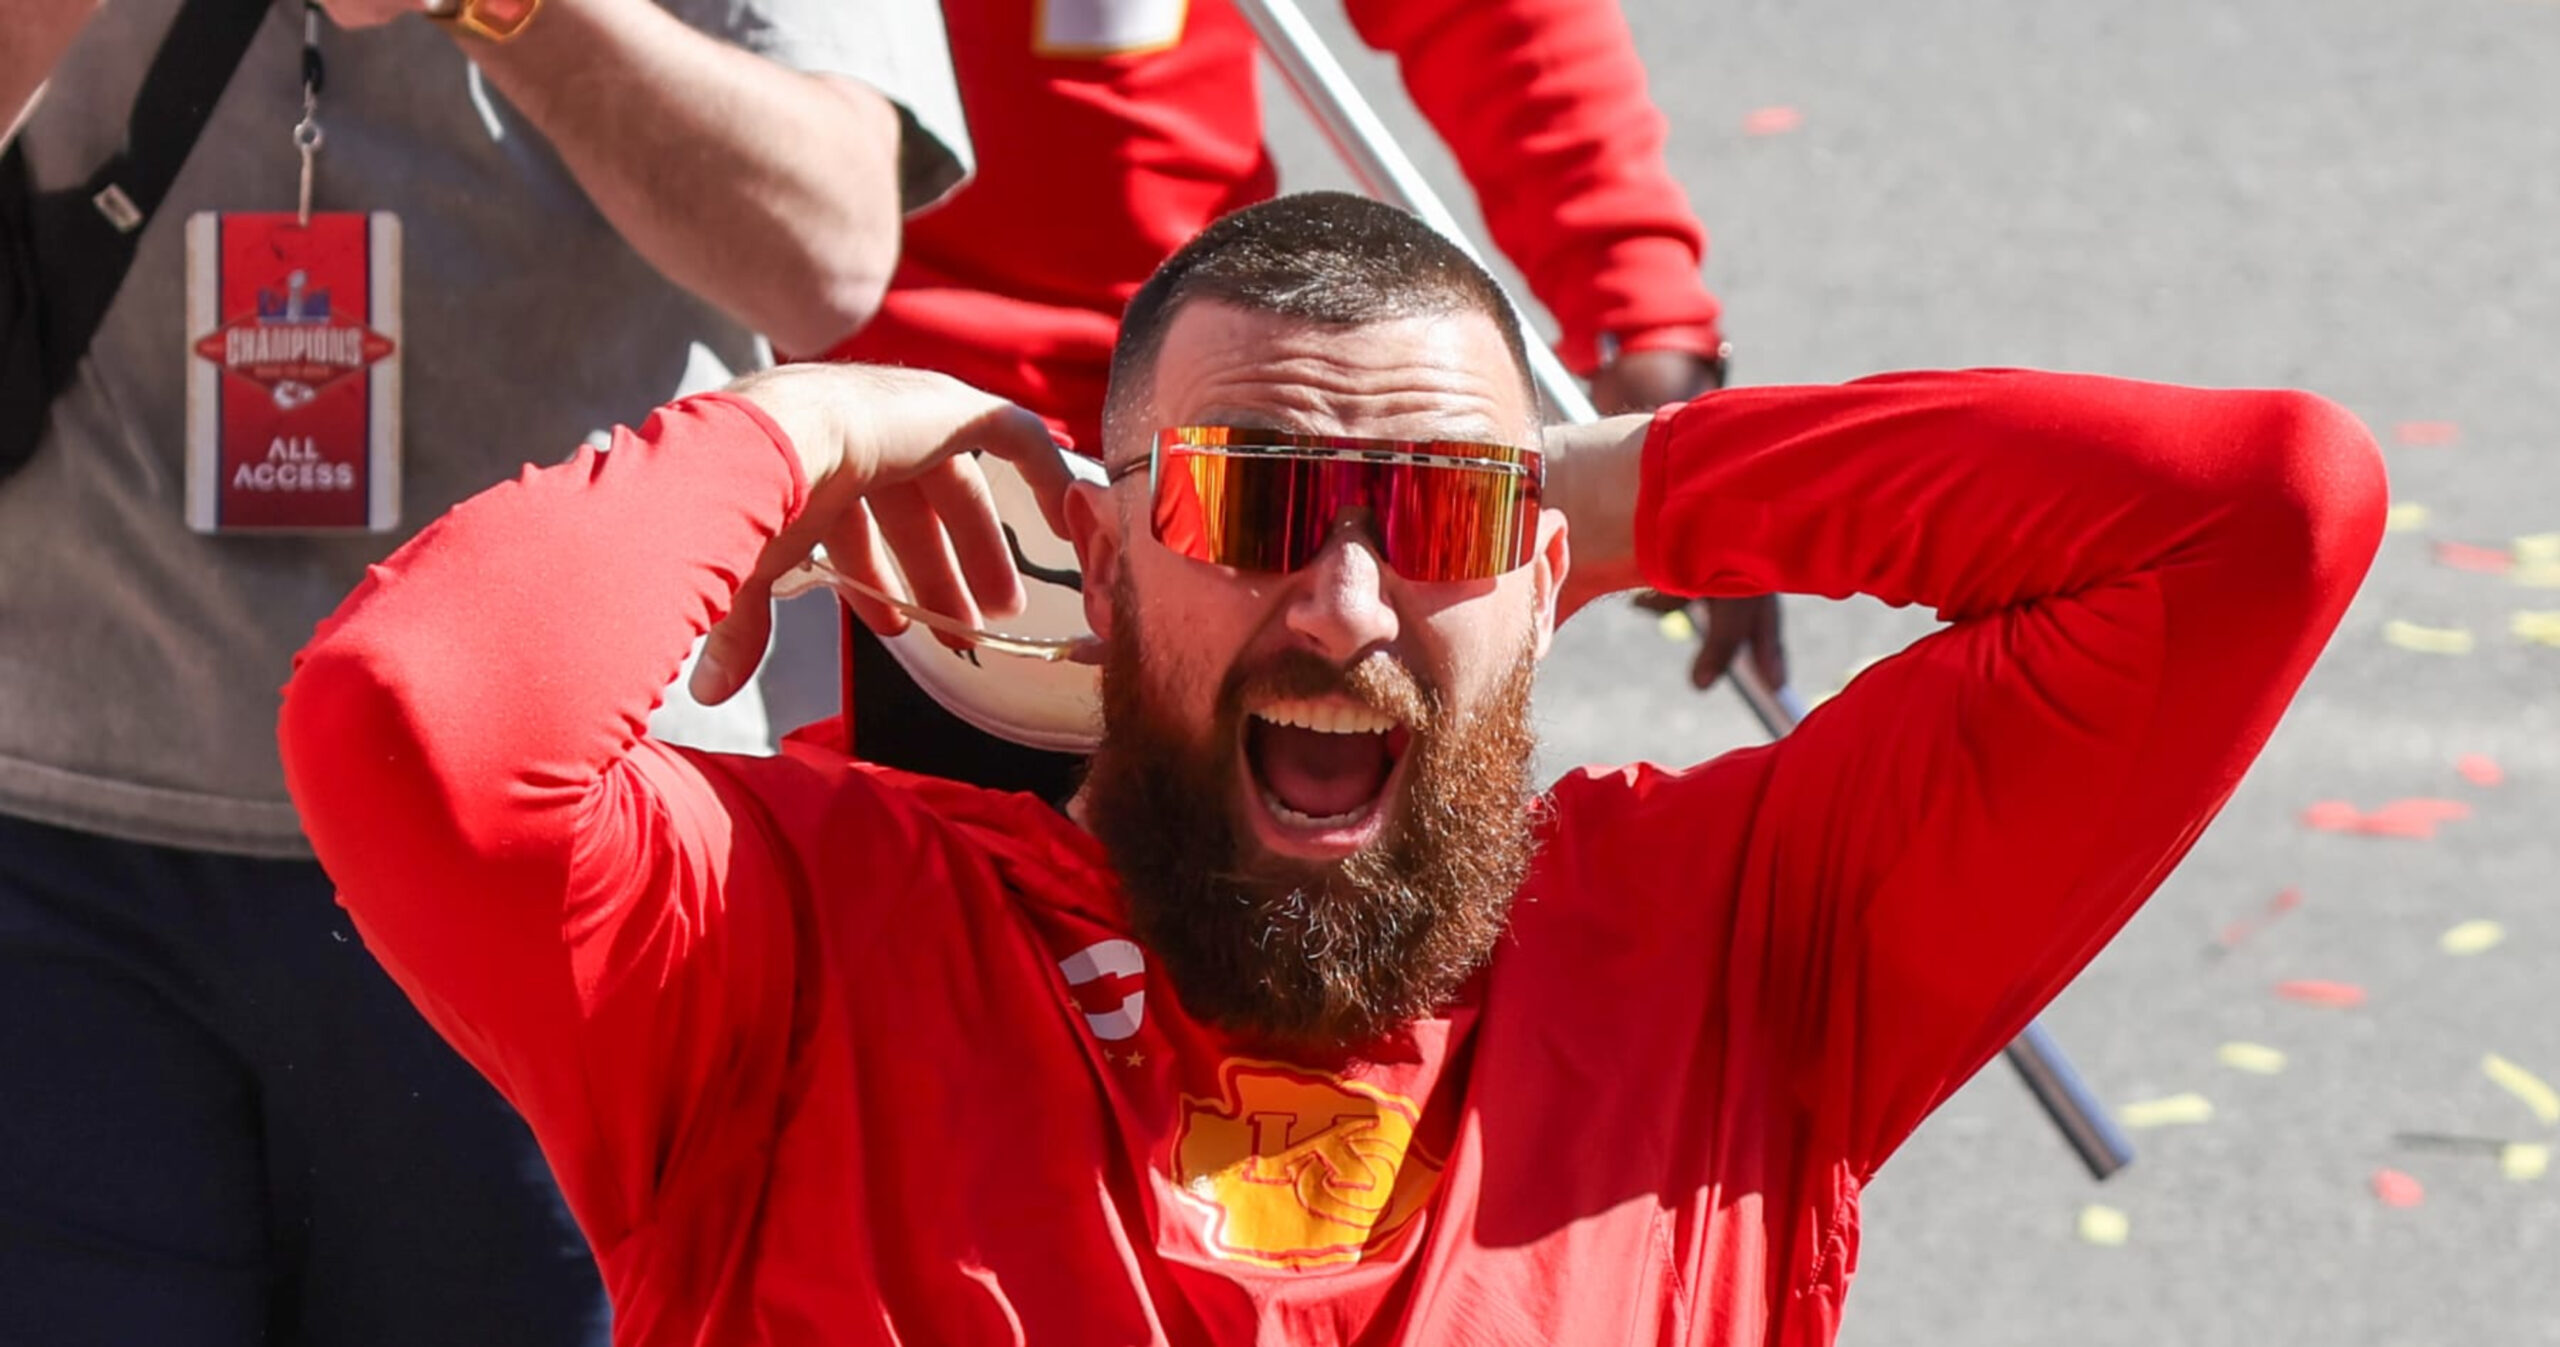 Video: Chiefs’ Travis Kelce Discusses Immoral Cowboys Meeting at Mix amid ‘Crimson Flag’